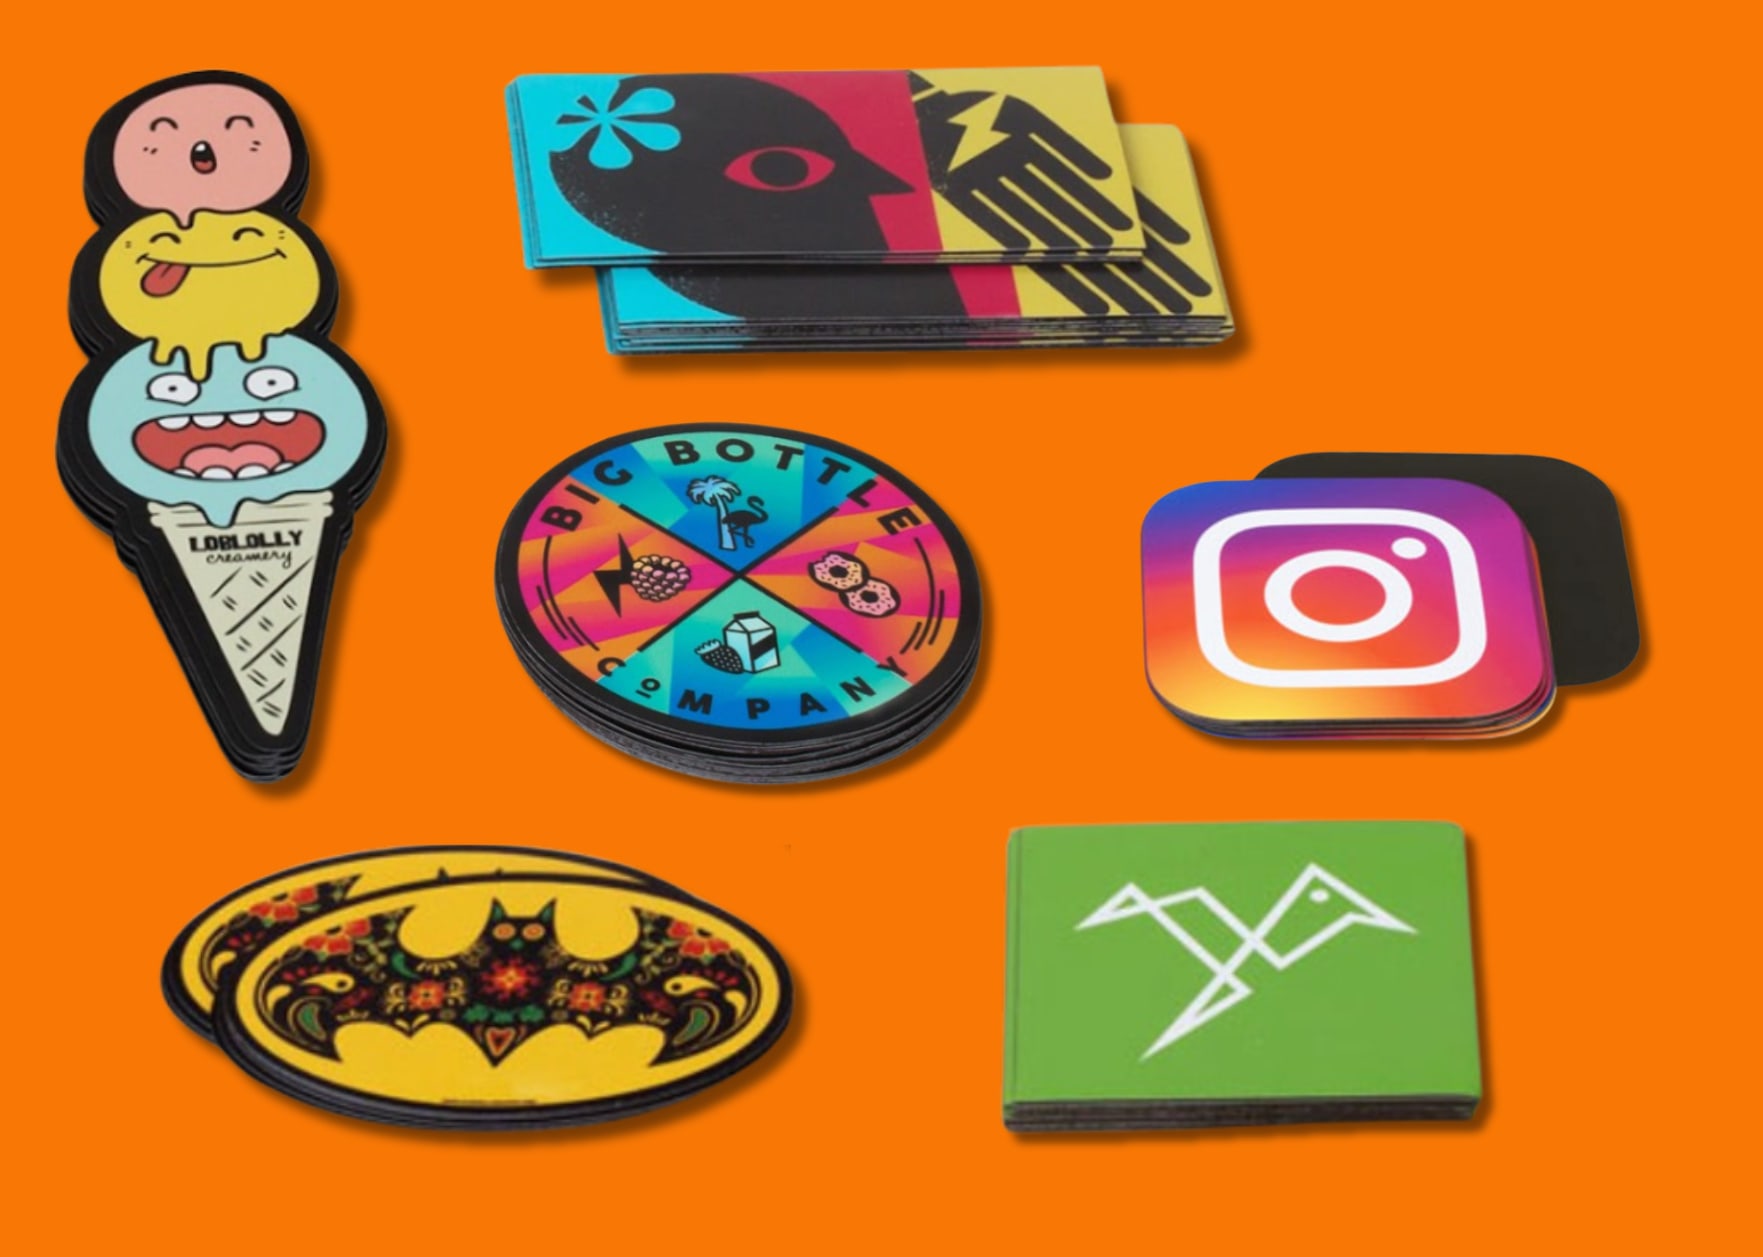 different types of custom magnets and shapes on a orange background